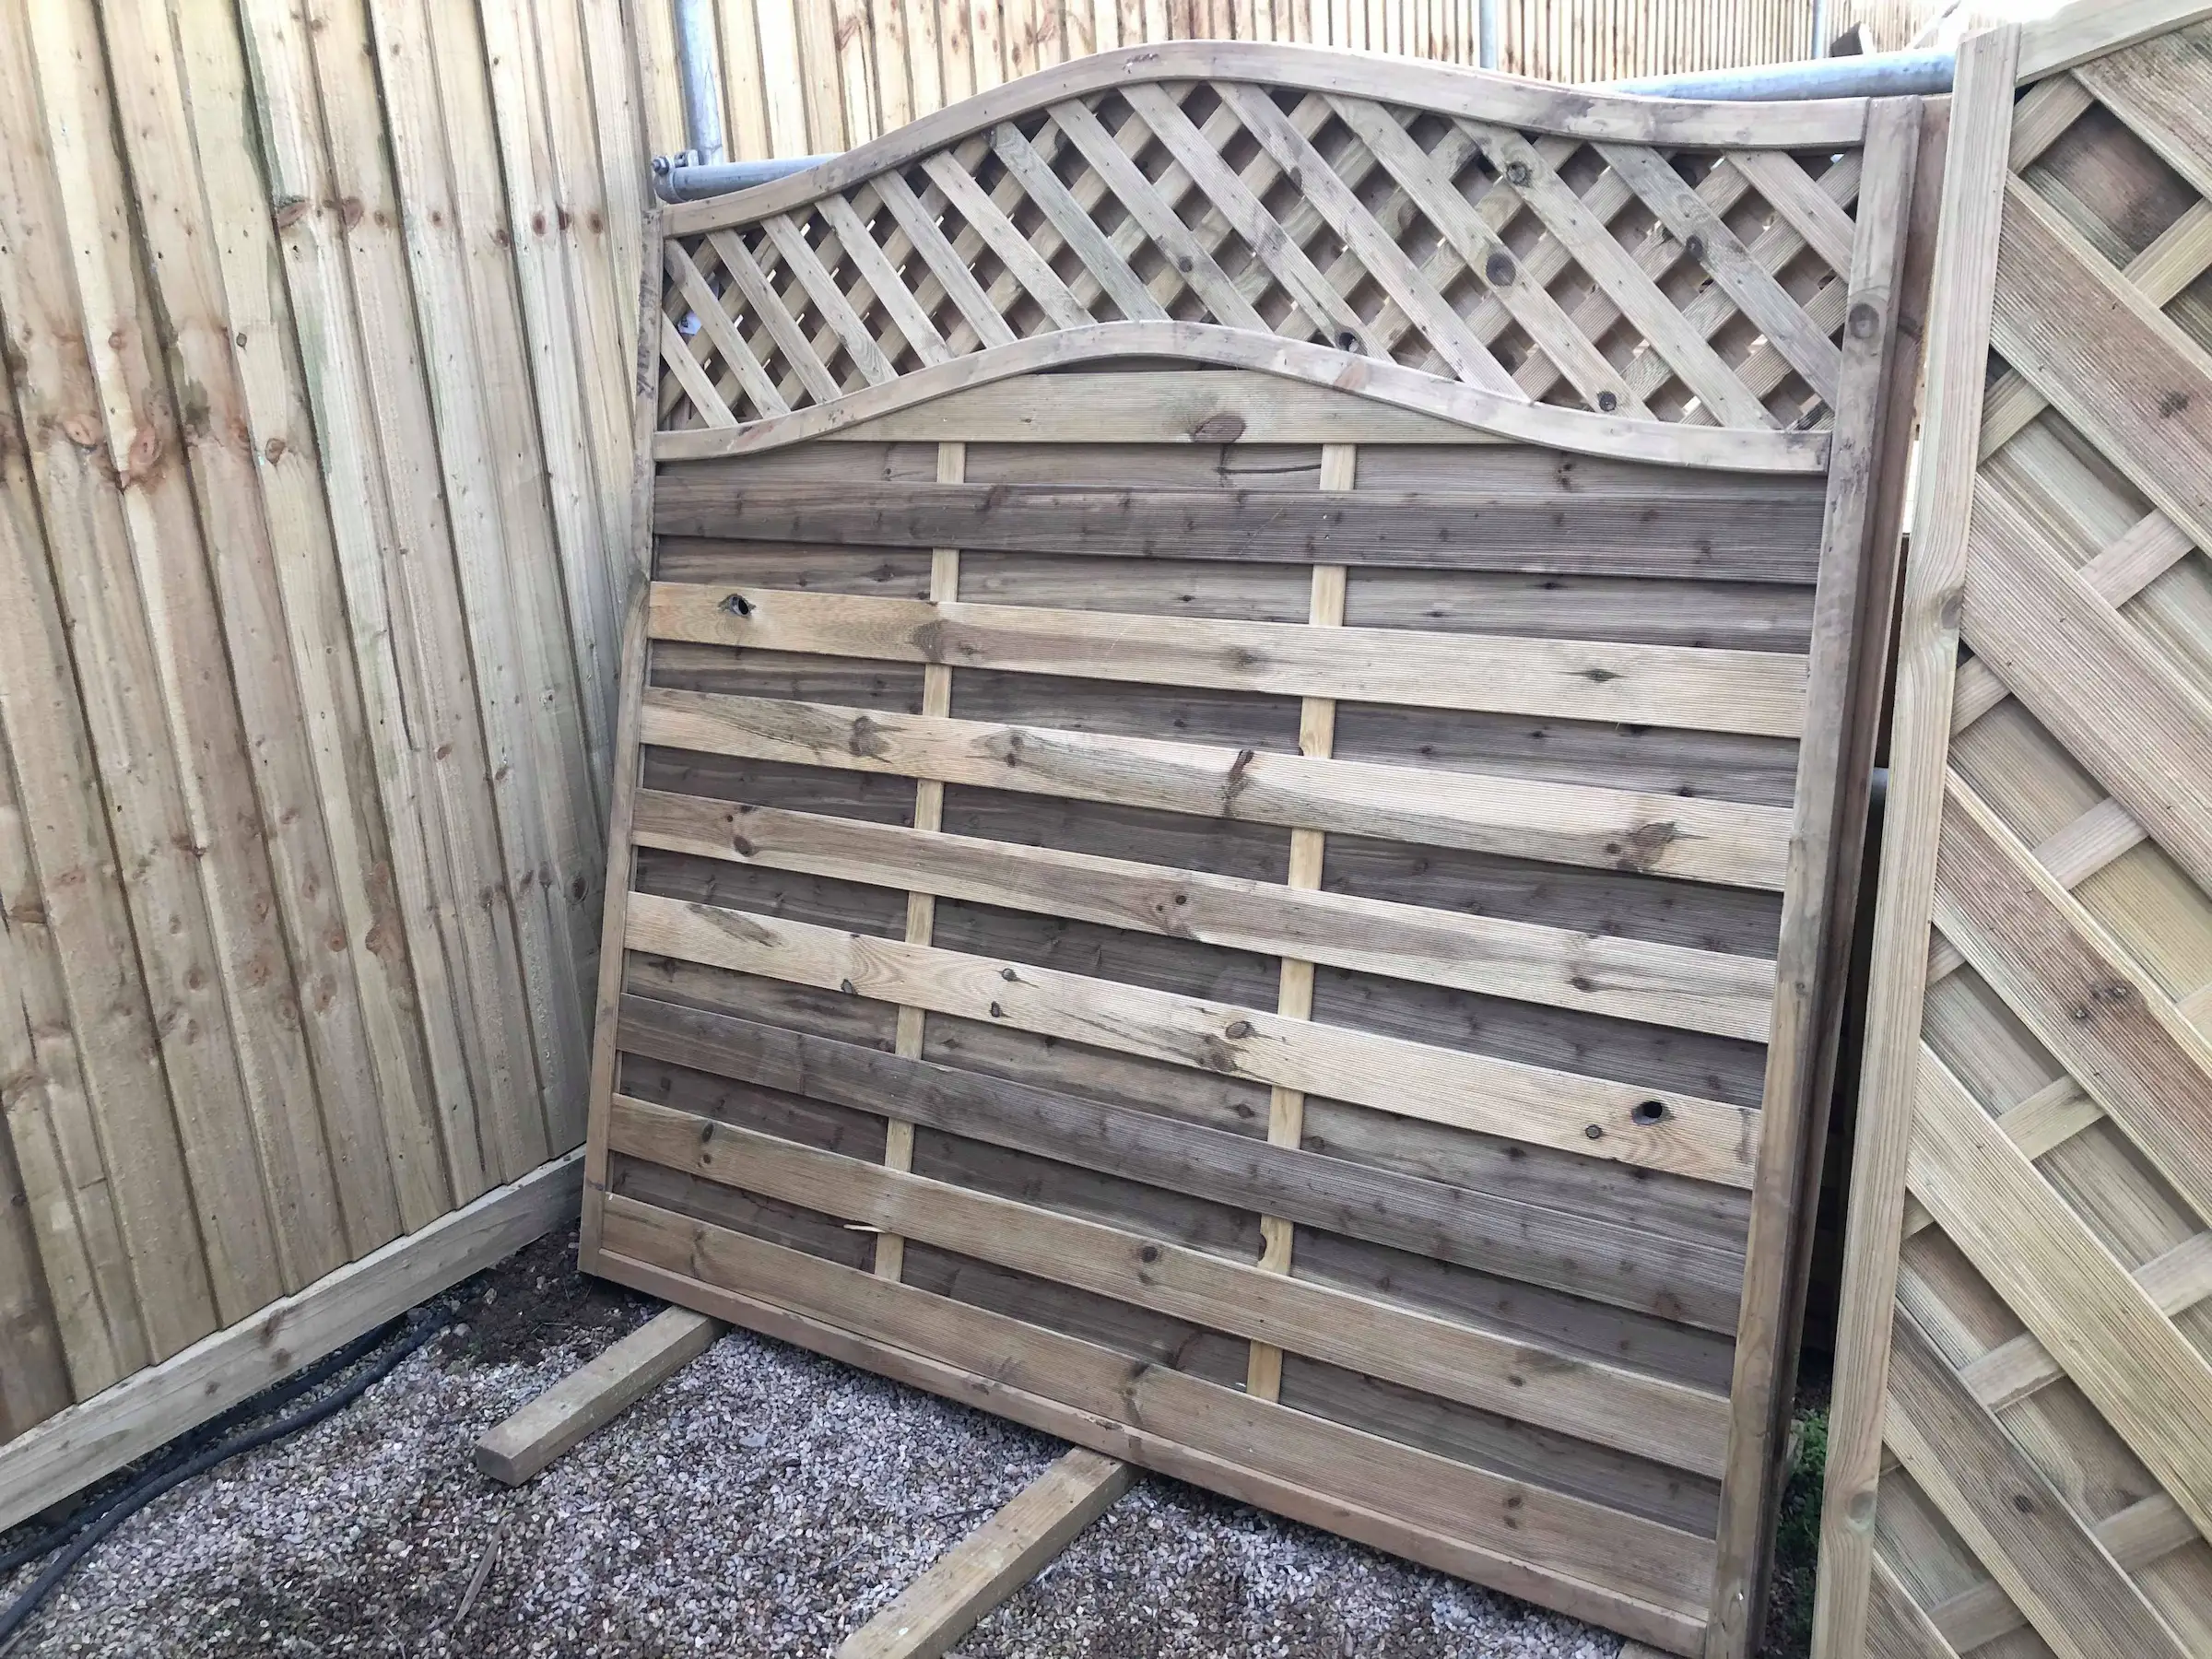 St. Mellior fence panels for sale in Hampshire and Salisbury.